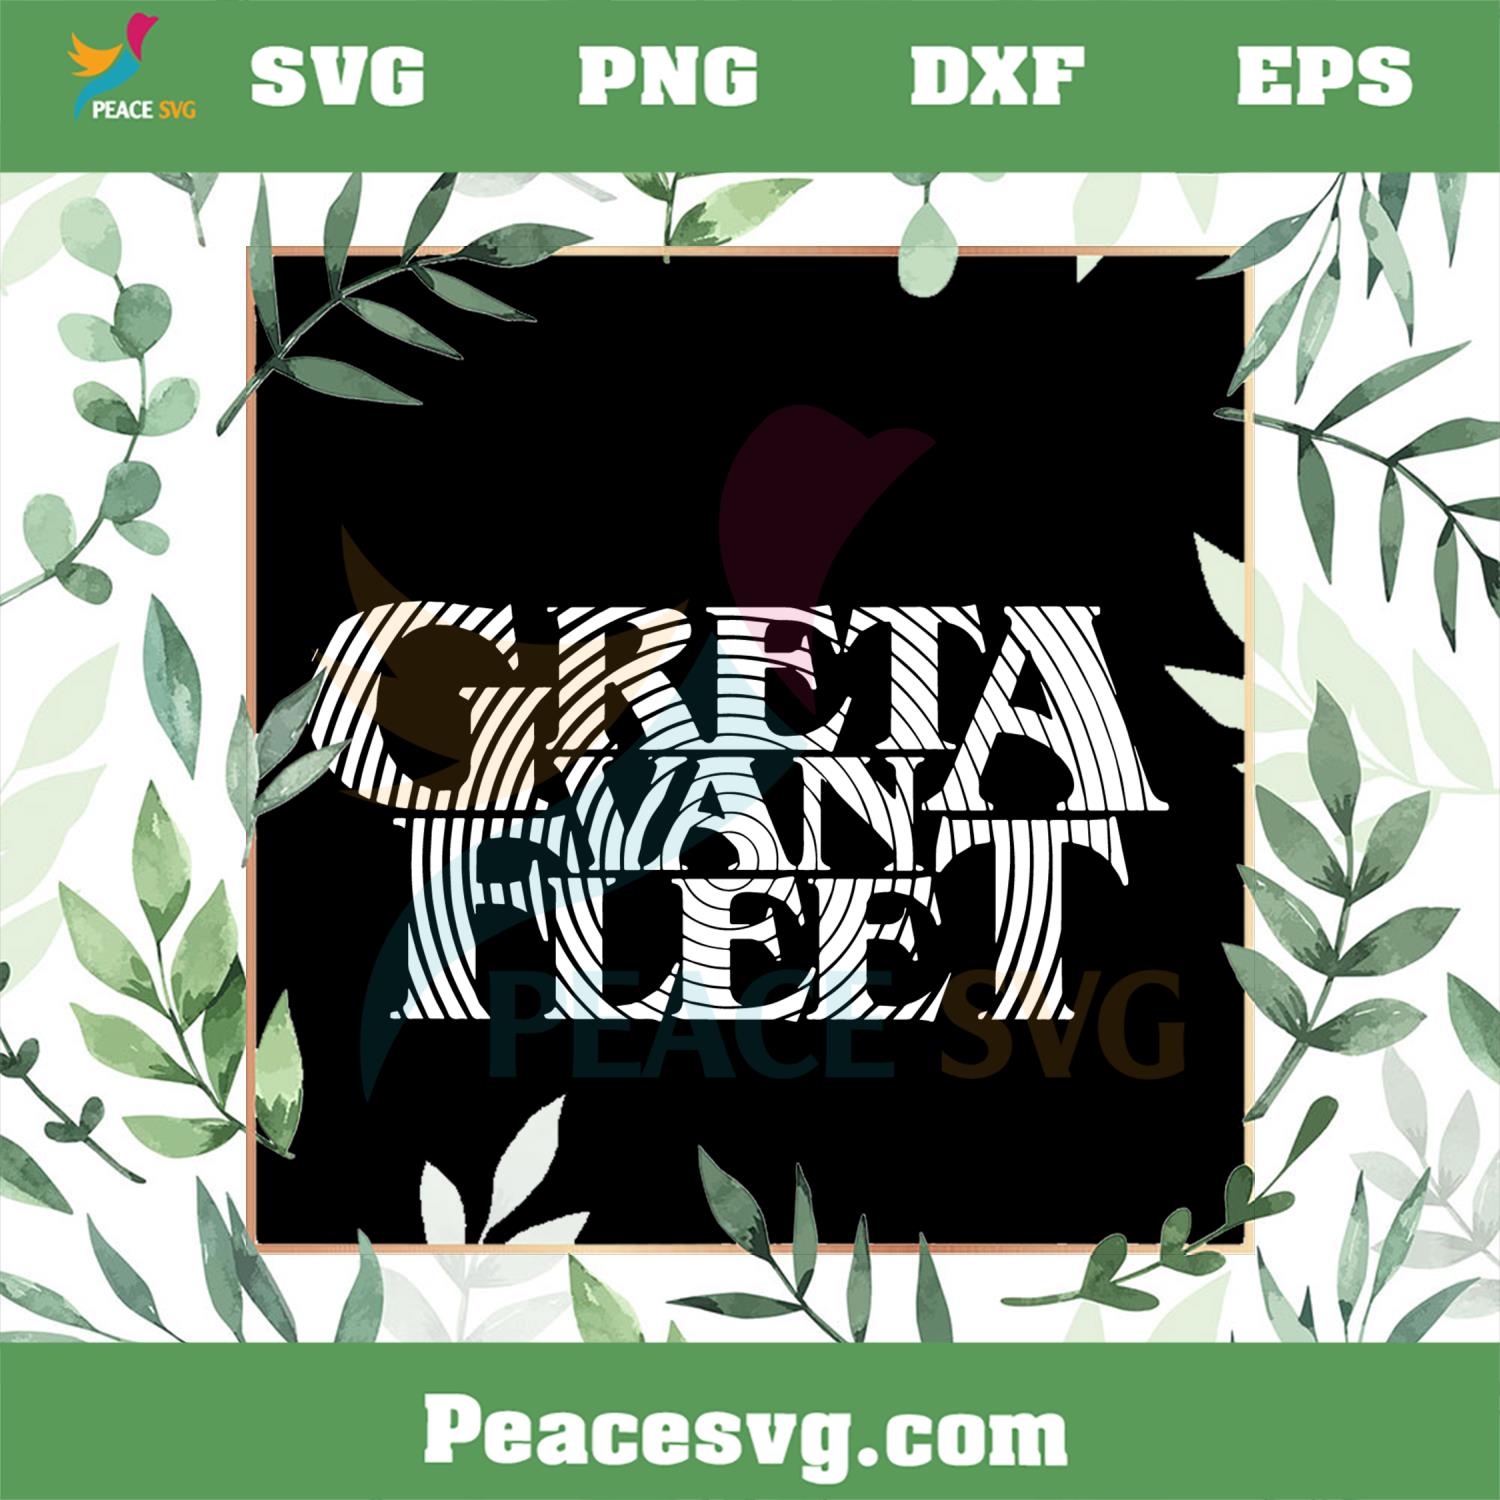 Greta Van Fleet SVG Cutting File for Personal Commercial Uses